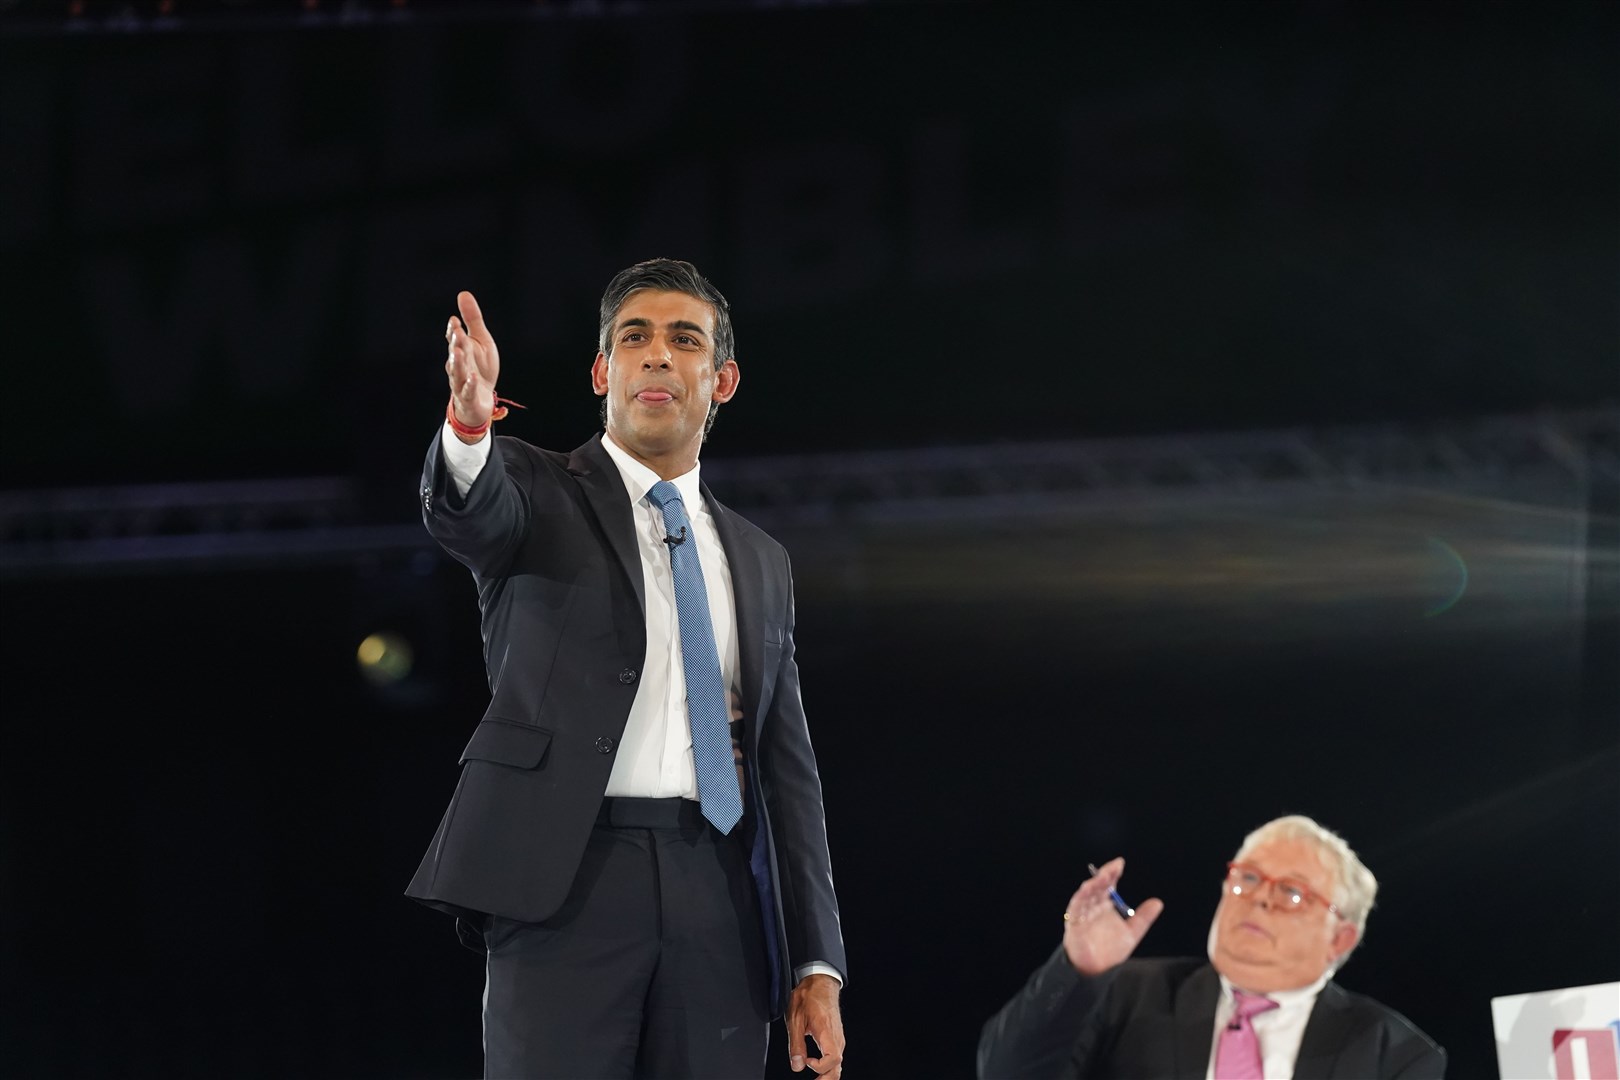 Rishi Sunak during a hustings event at Wembley Arena (Stefan Rousseau/PA)